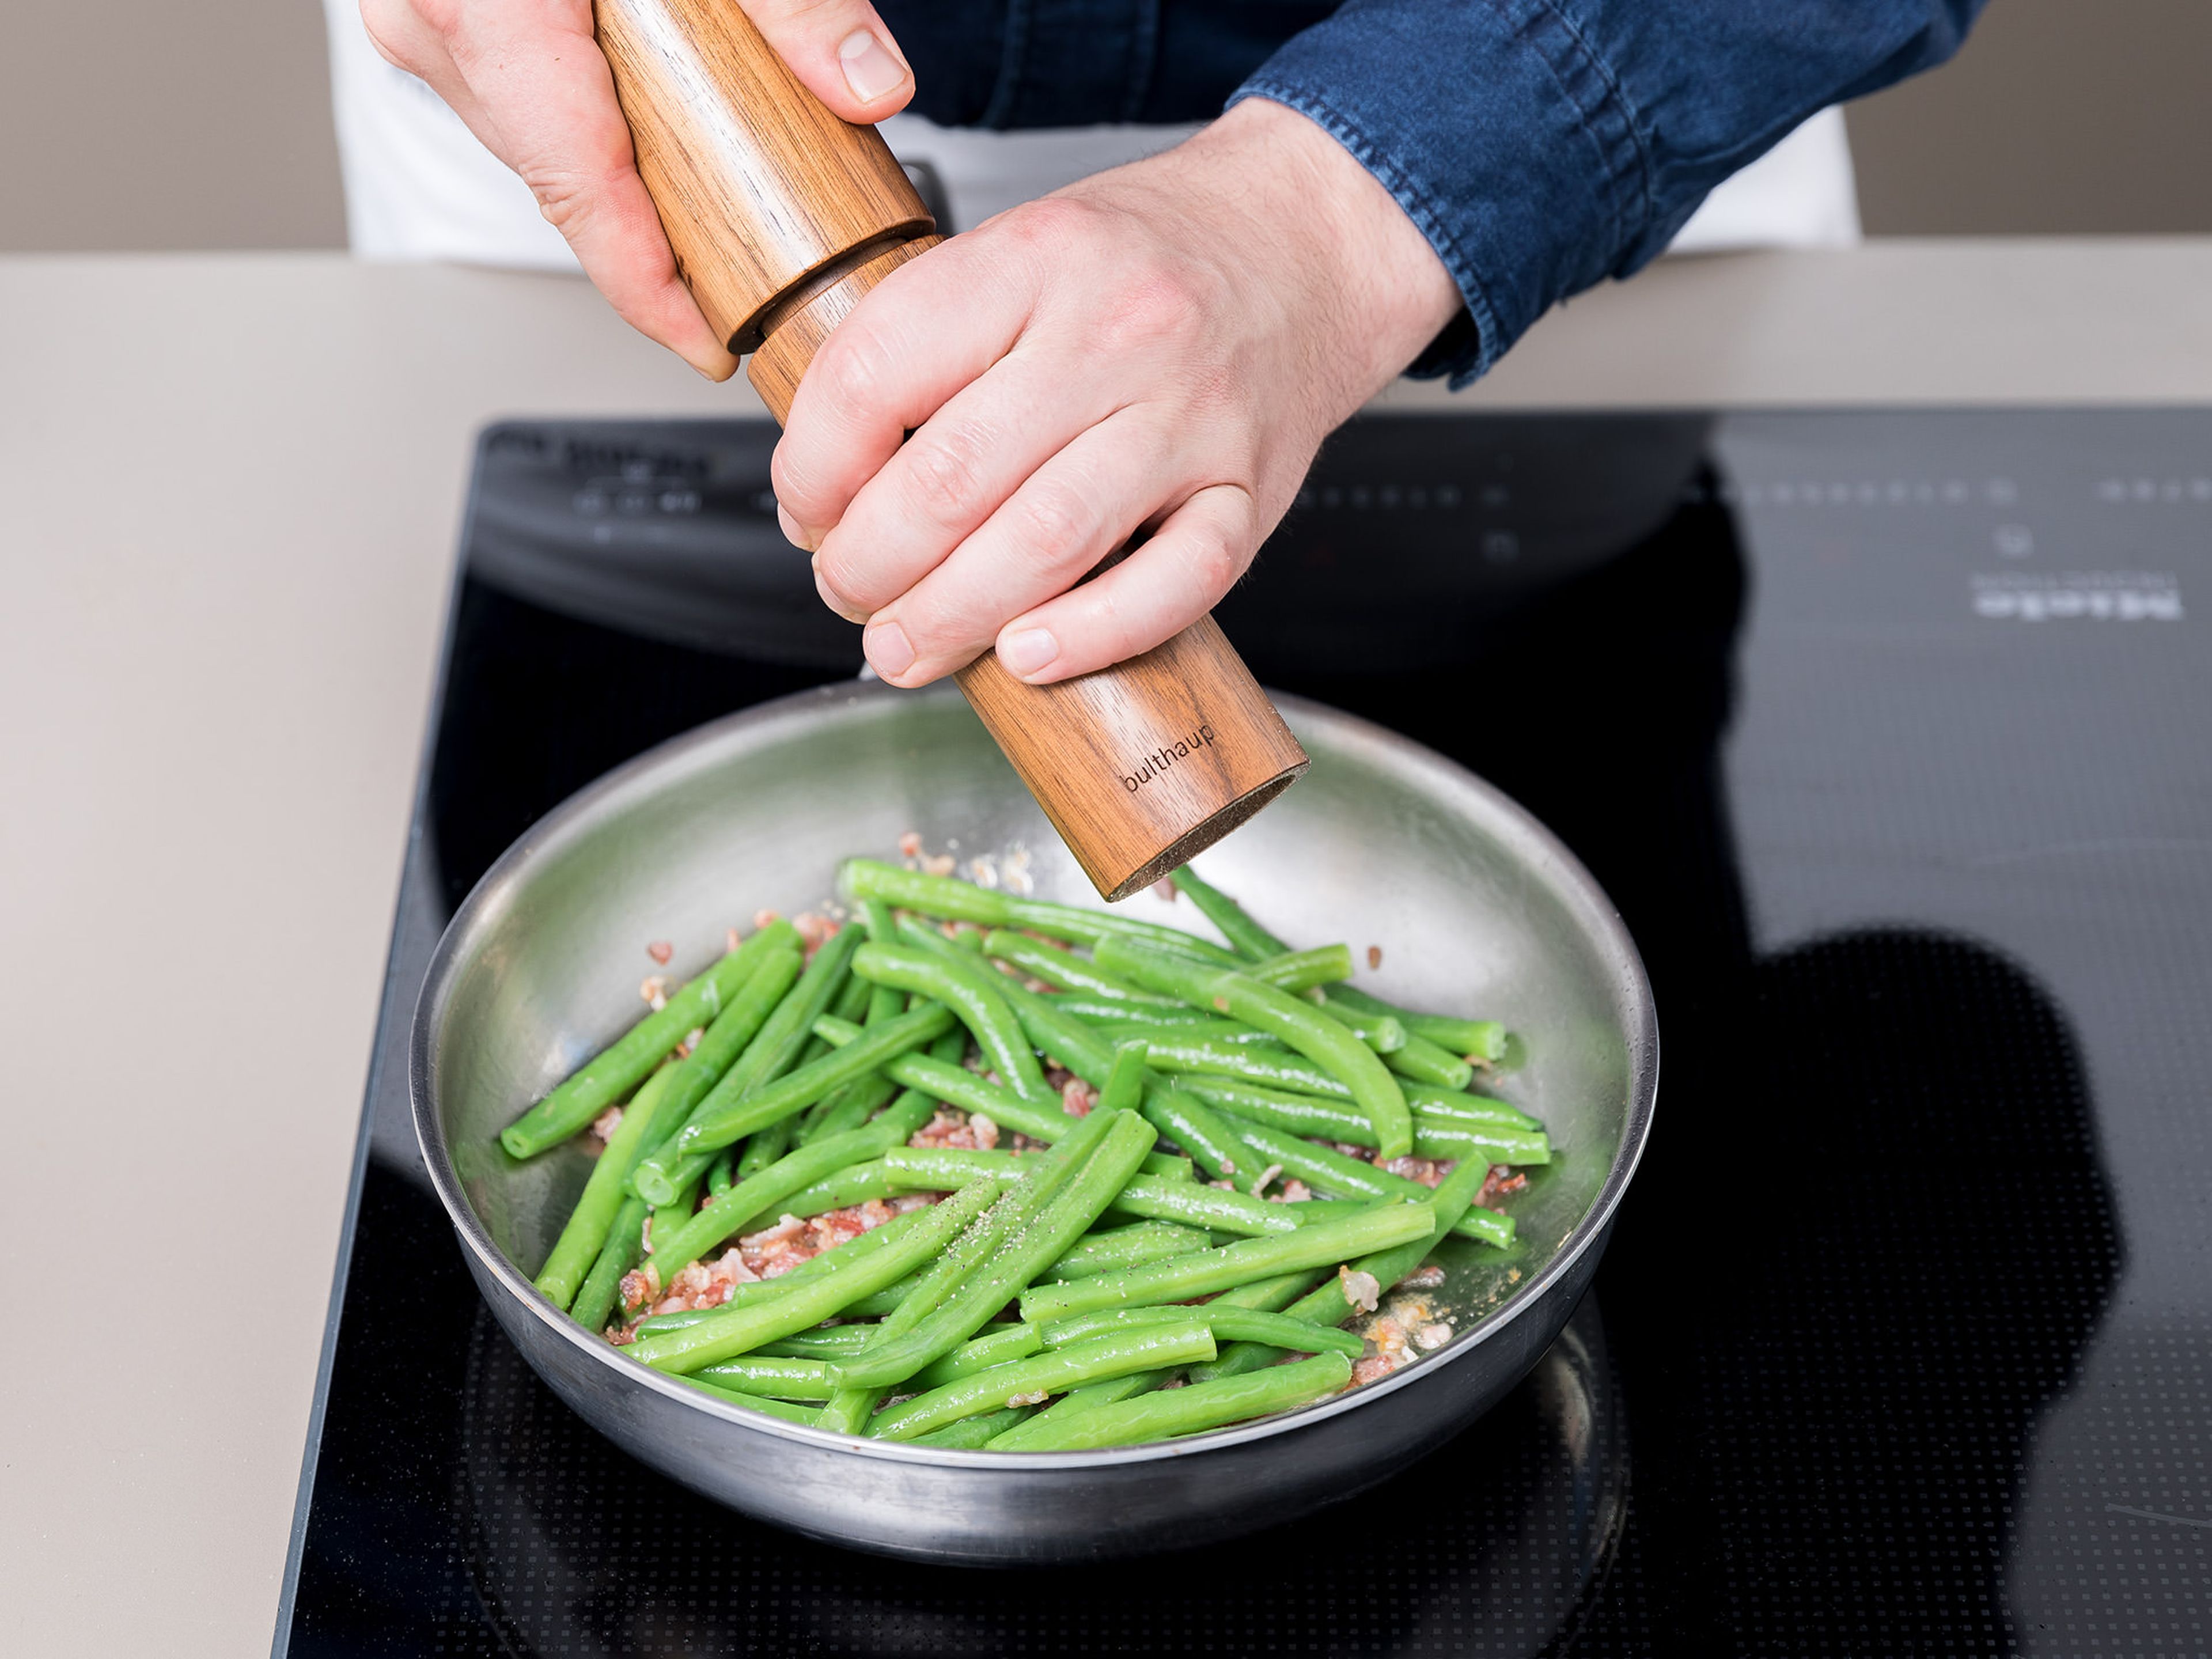 In a frying pan set over medium-high heat, melt remaining butter. Add smoked bacon and green beans. Season with salt and pepper then add the savory. Sauté for approx. 3 min. Slice rack of lamb and serve with onion purée and green beans. Enjoy!